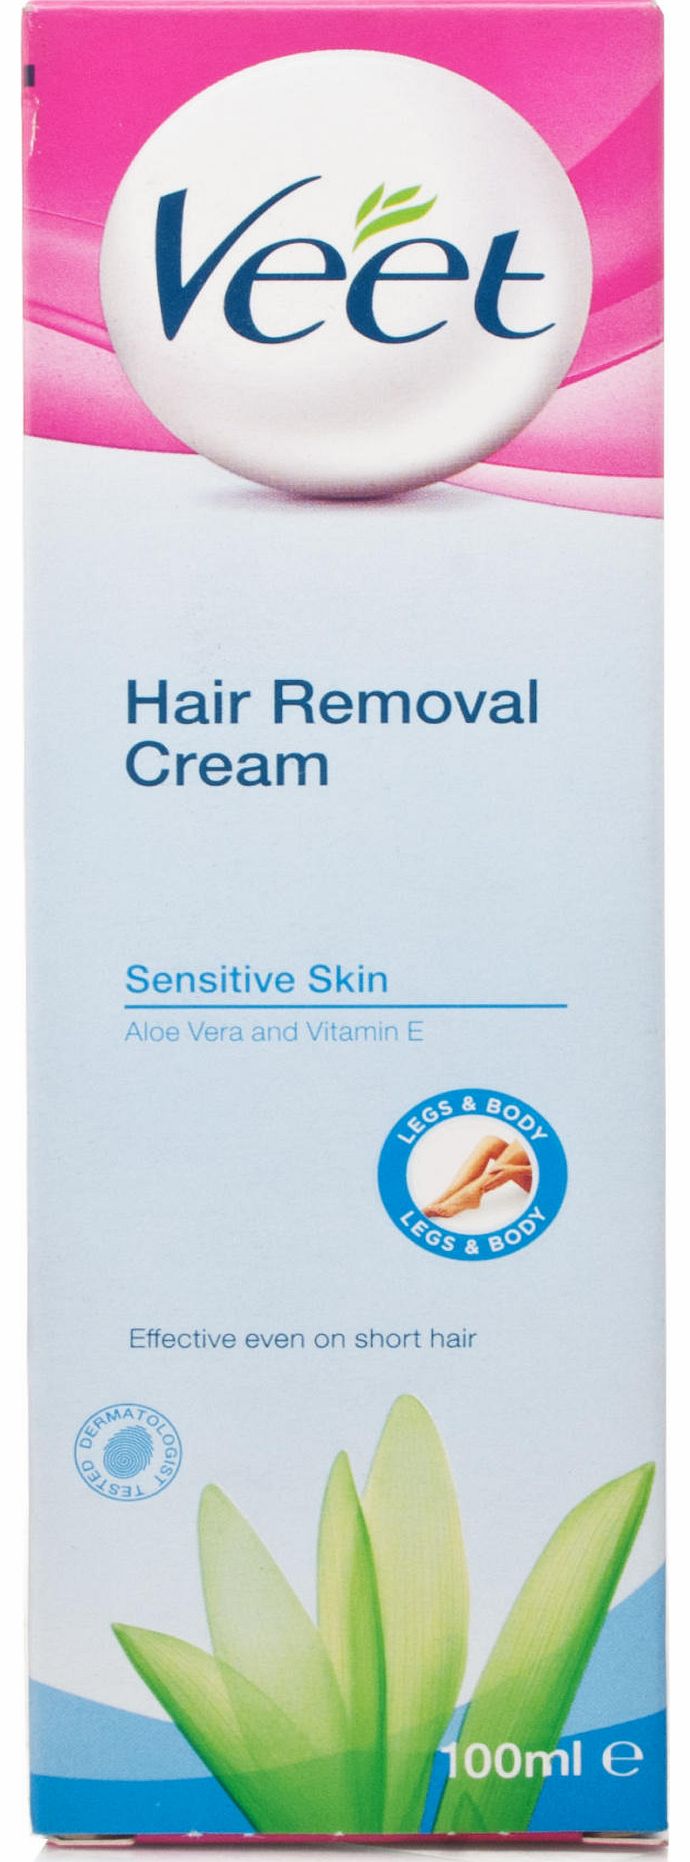 5 Minute Hair Removal Cream for Sensitive